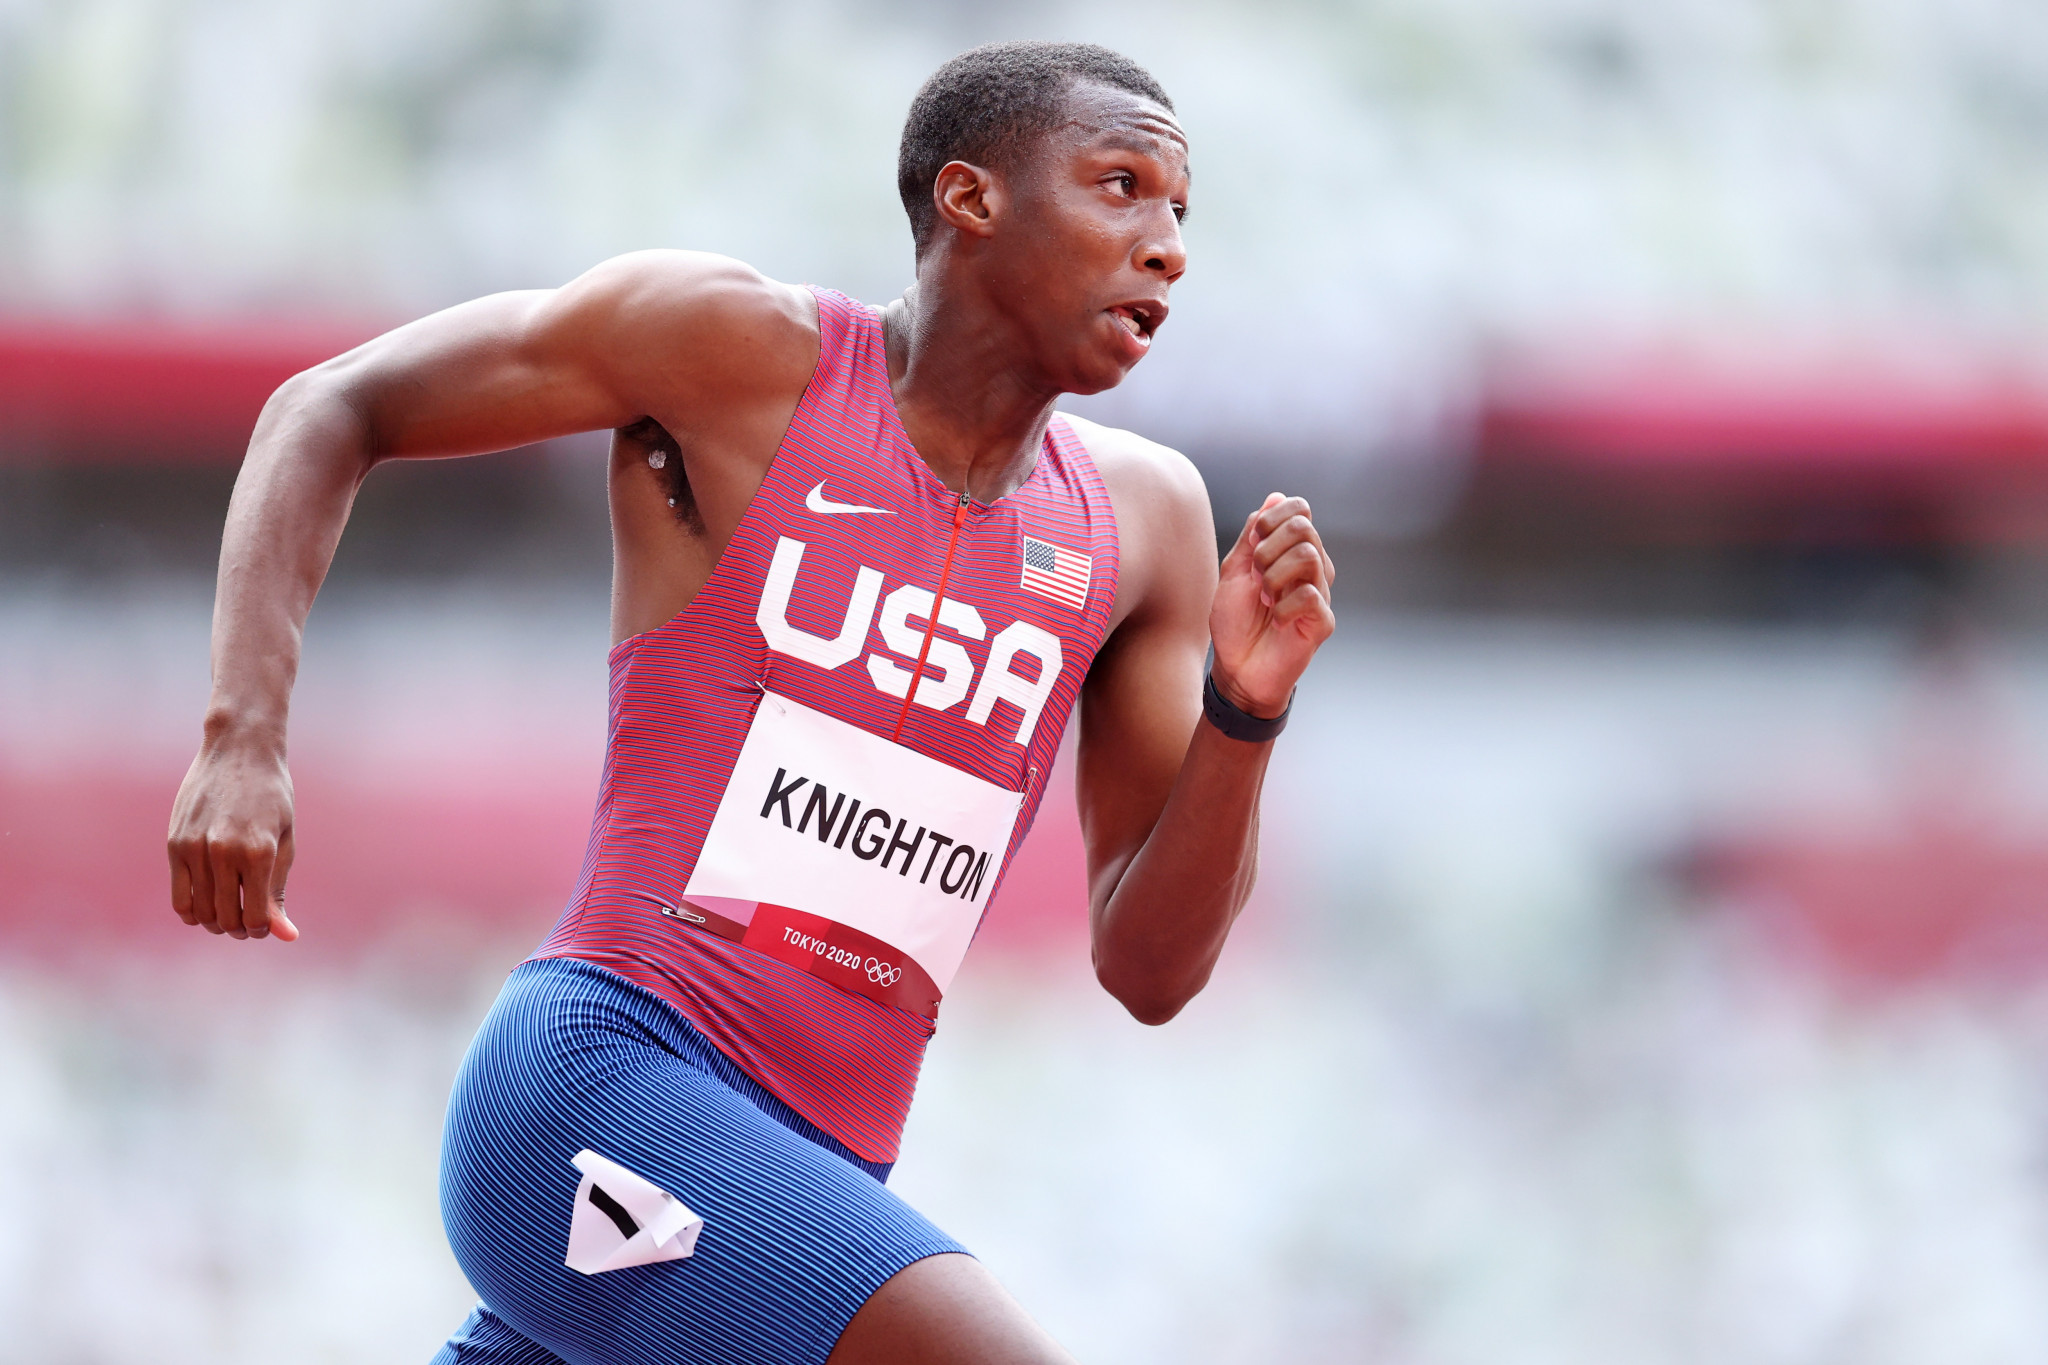 American sprinter who broke Bolt world records nominated for 2021 Male Rising Star Award